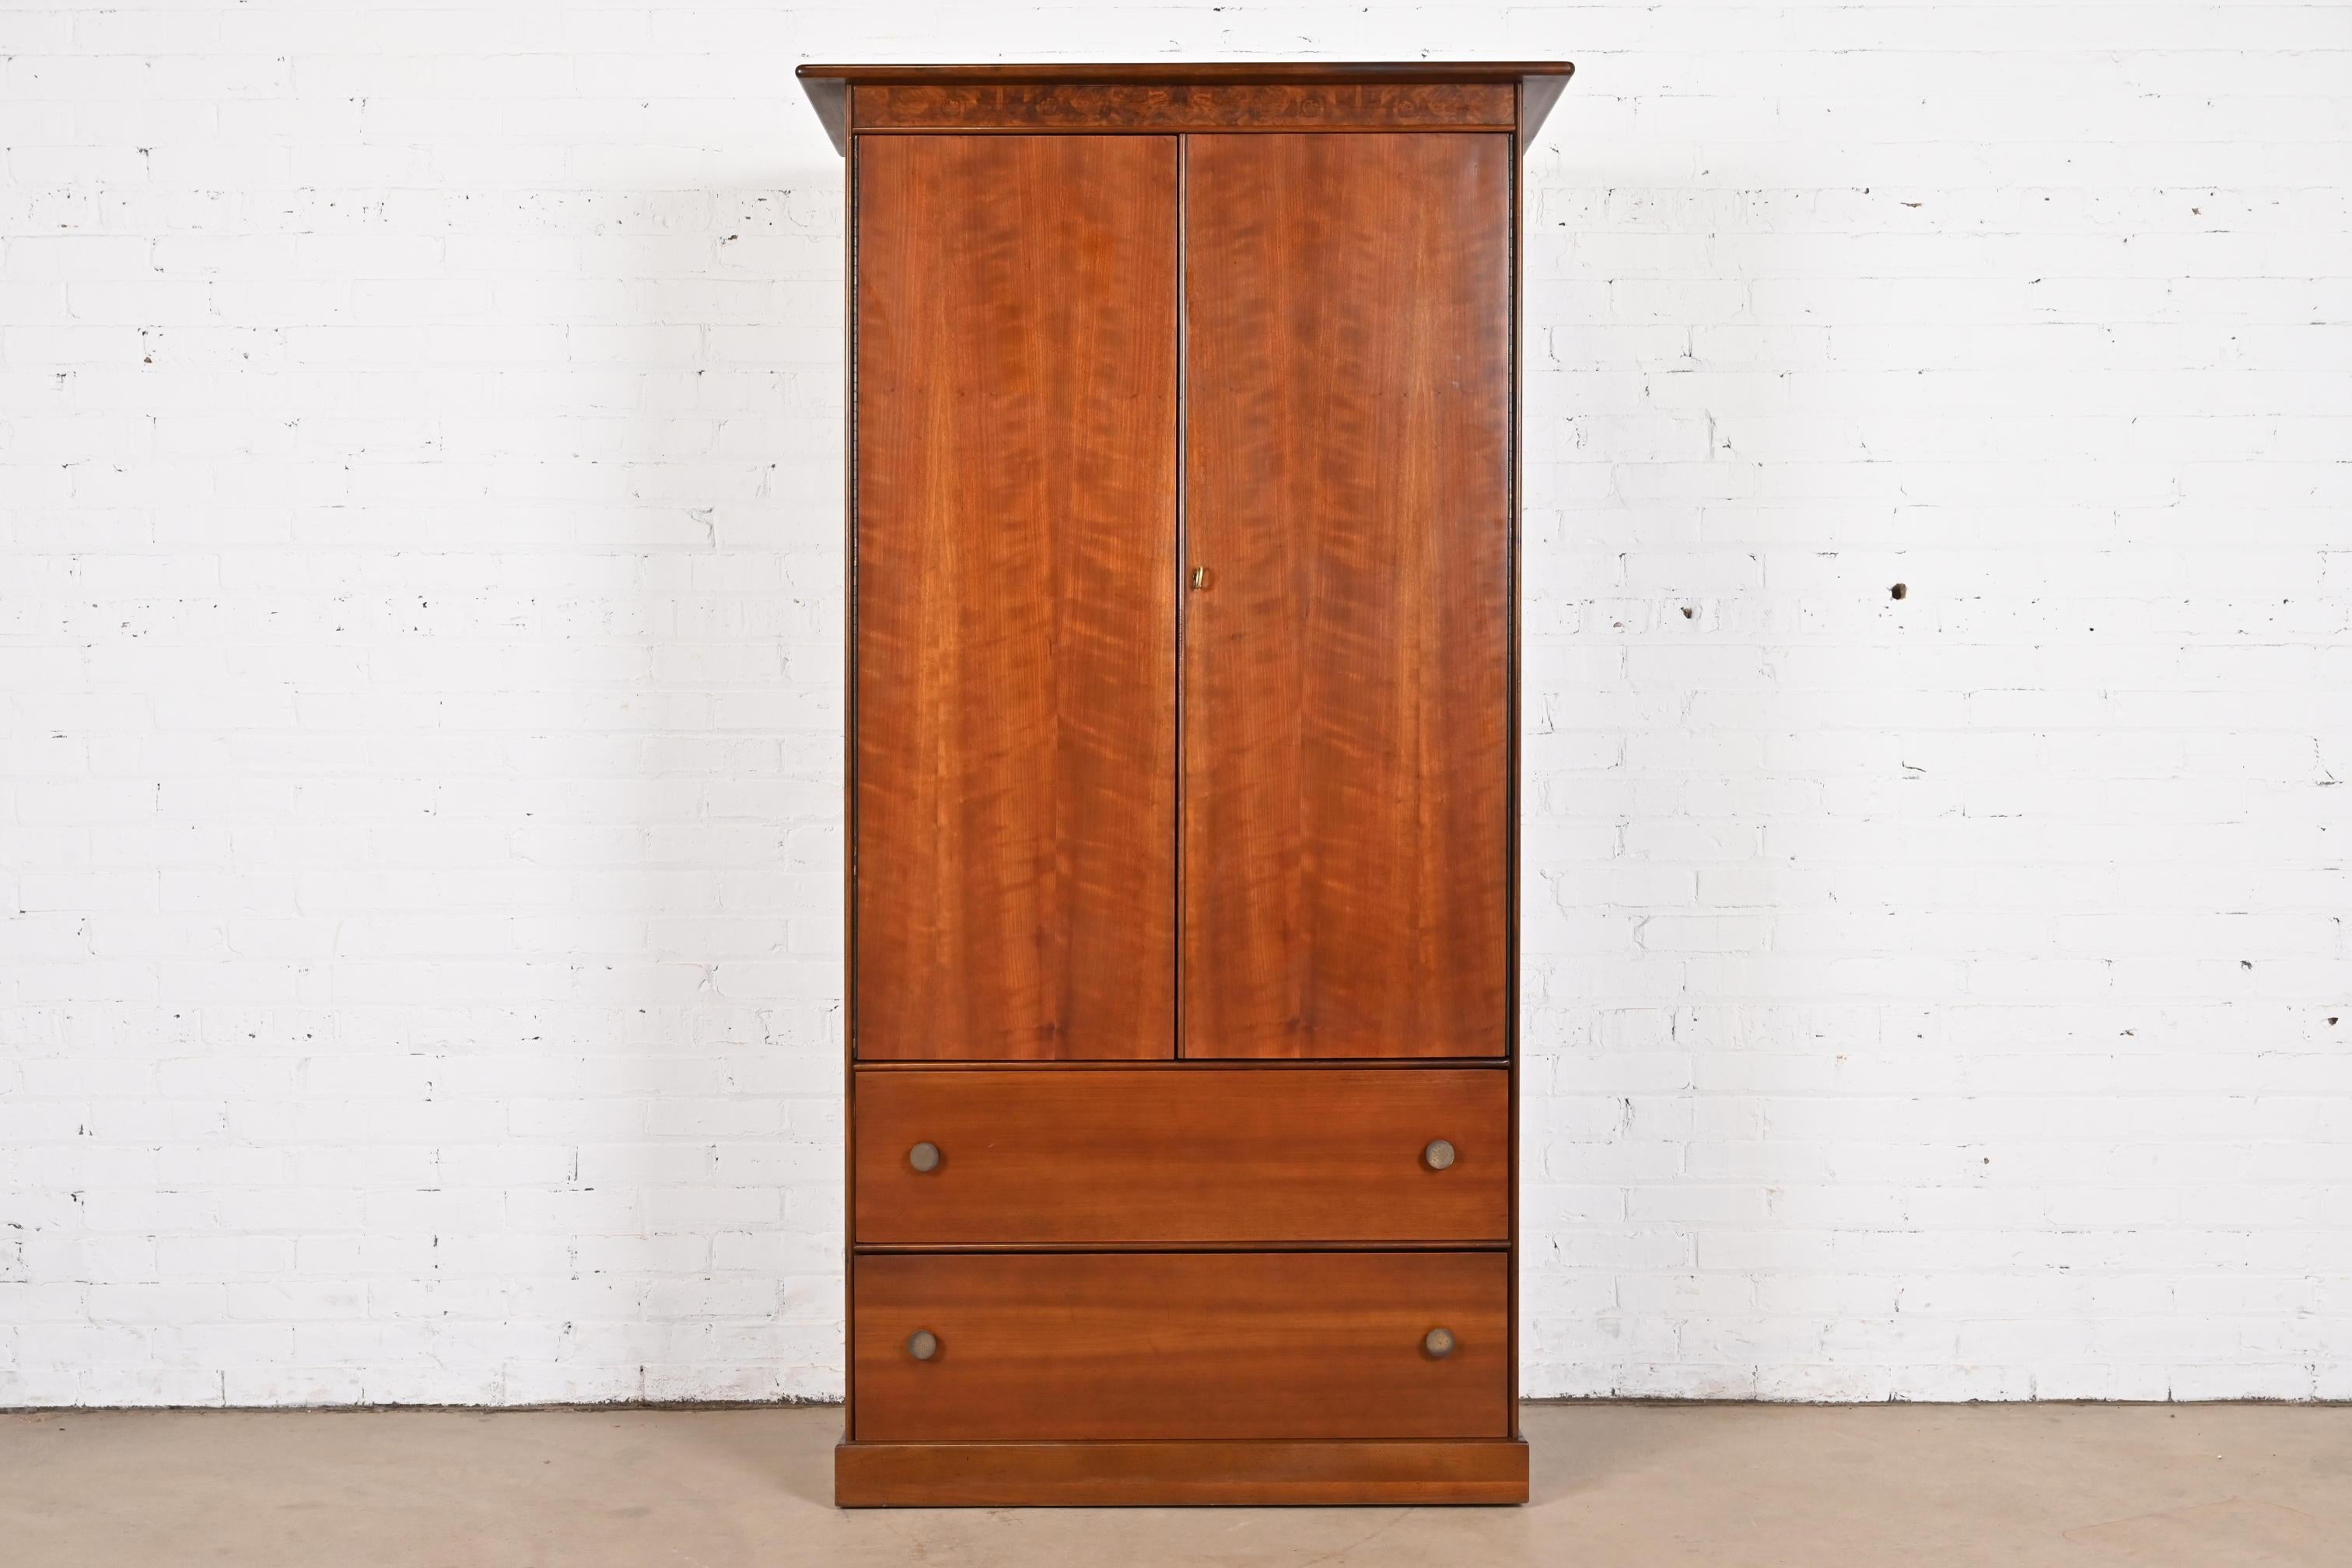 A rare and outstanding Mid-Century Modern armoire dresser

By Milo Baughman for Directional, 